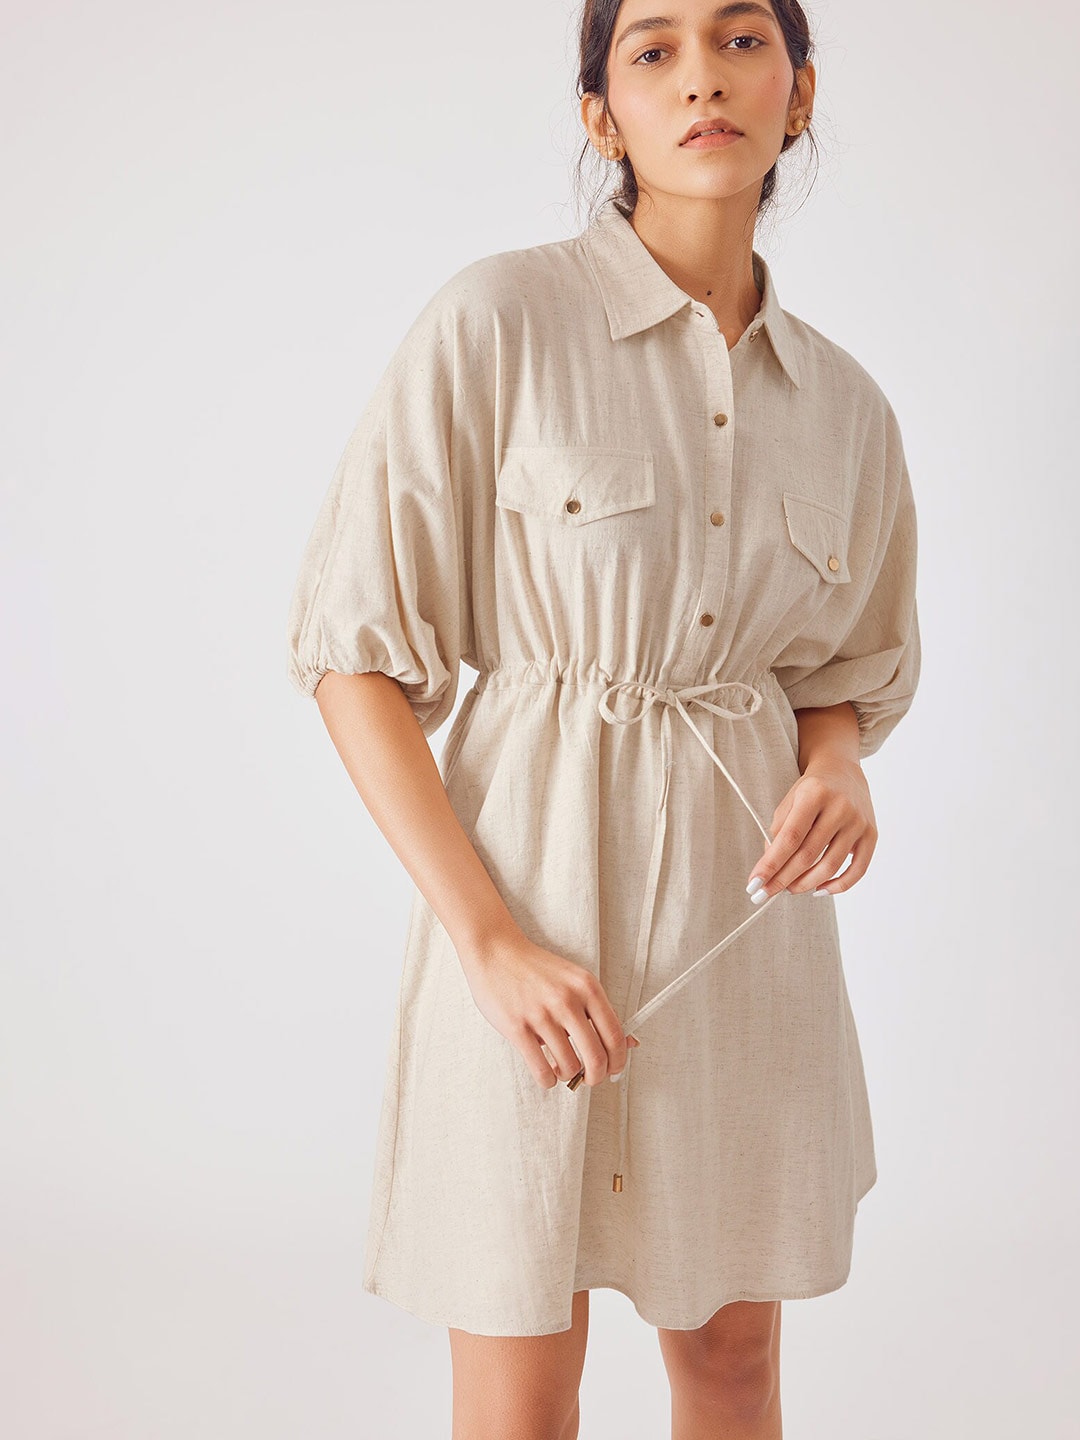 The Label Life Beige Polka Dot Shirt Dress Price in India